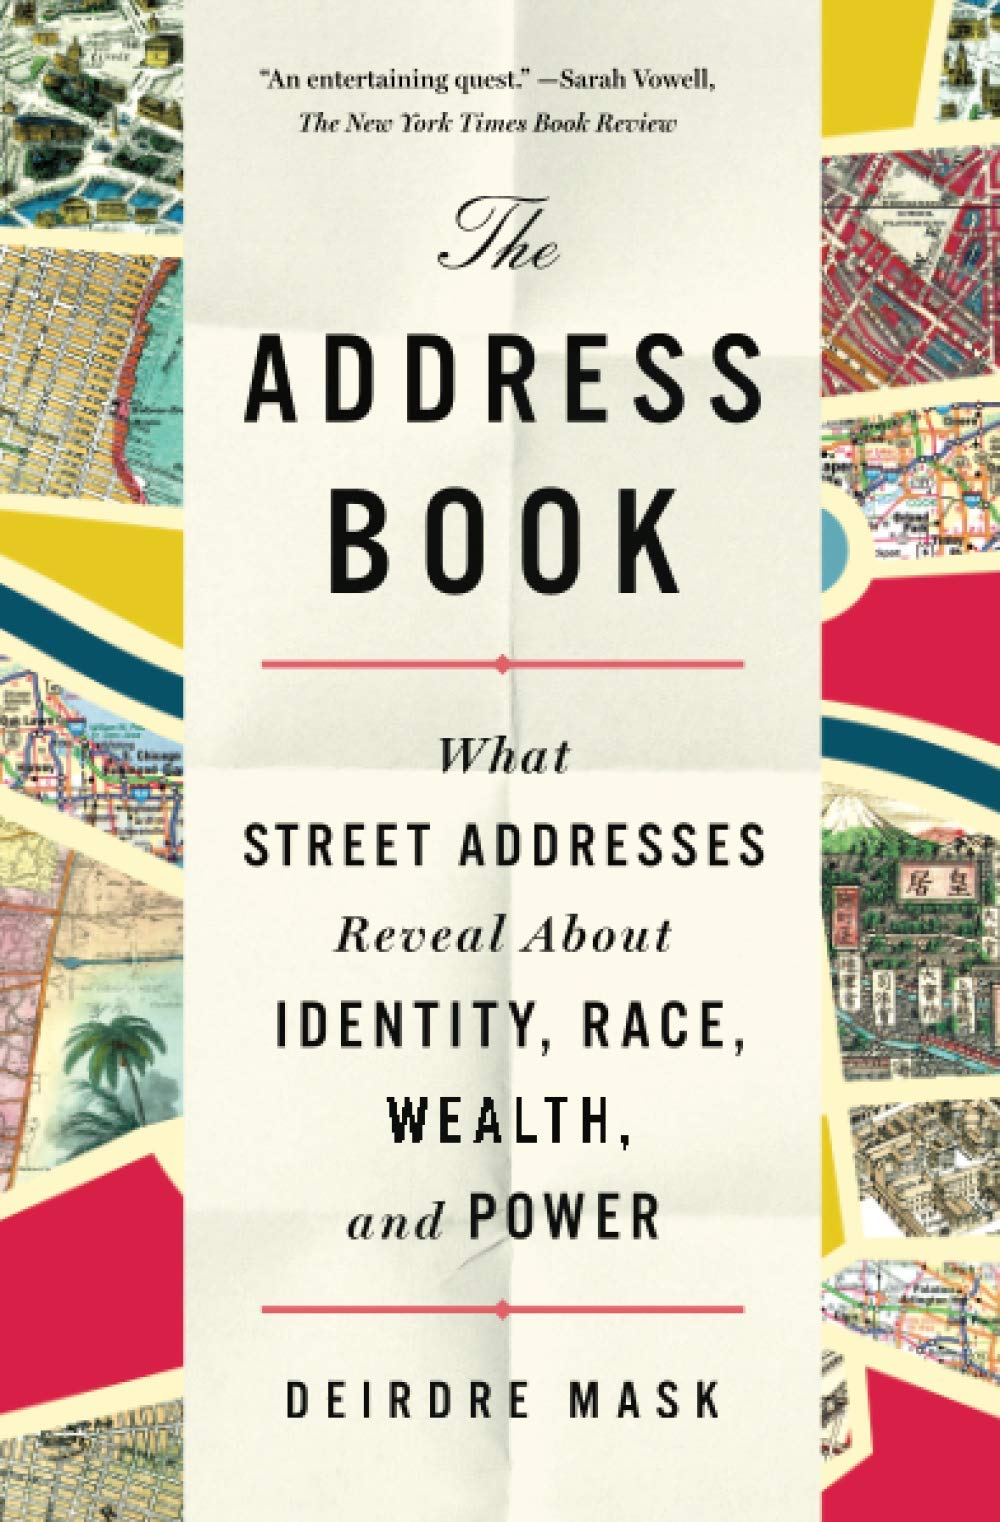 Image of "The Address Book" 